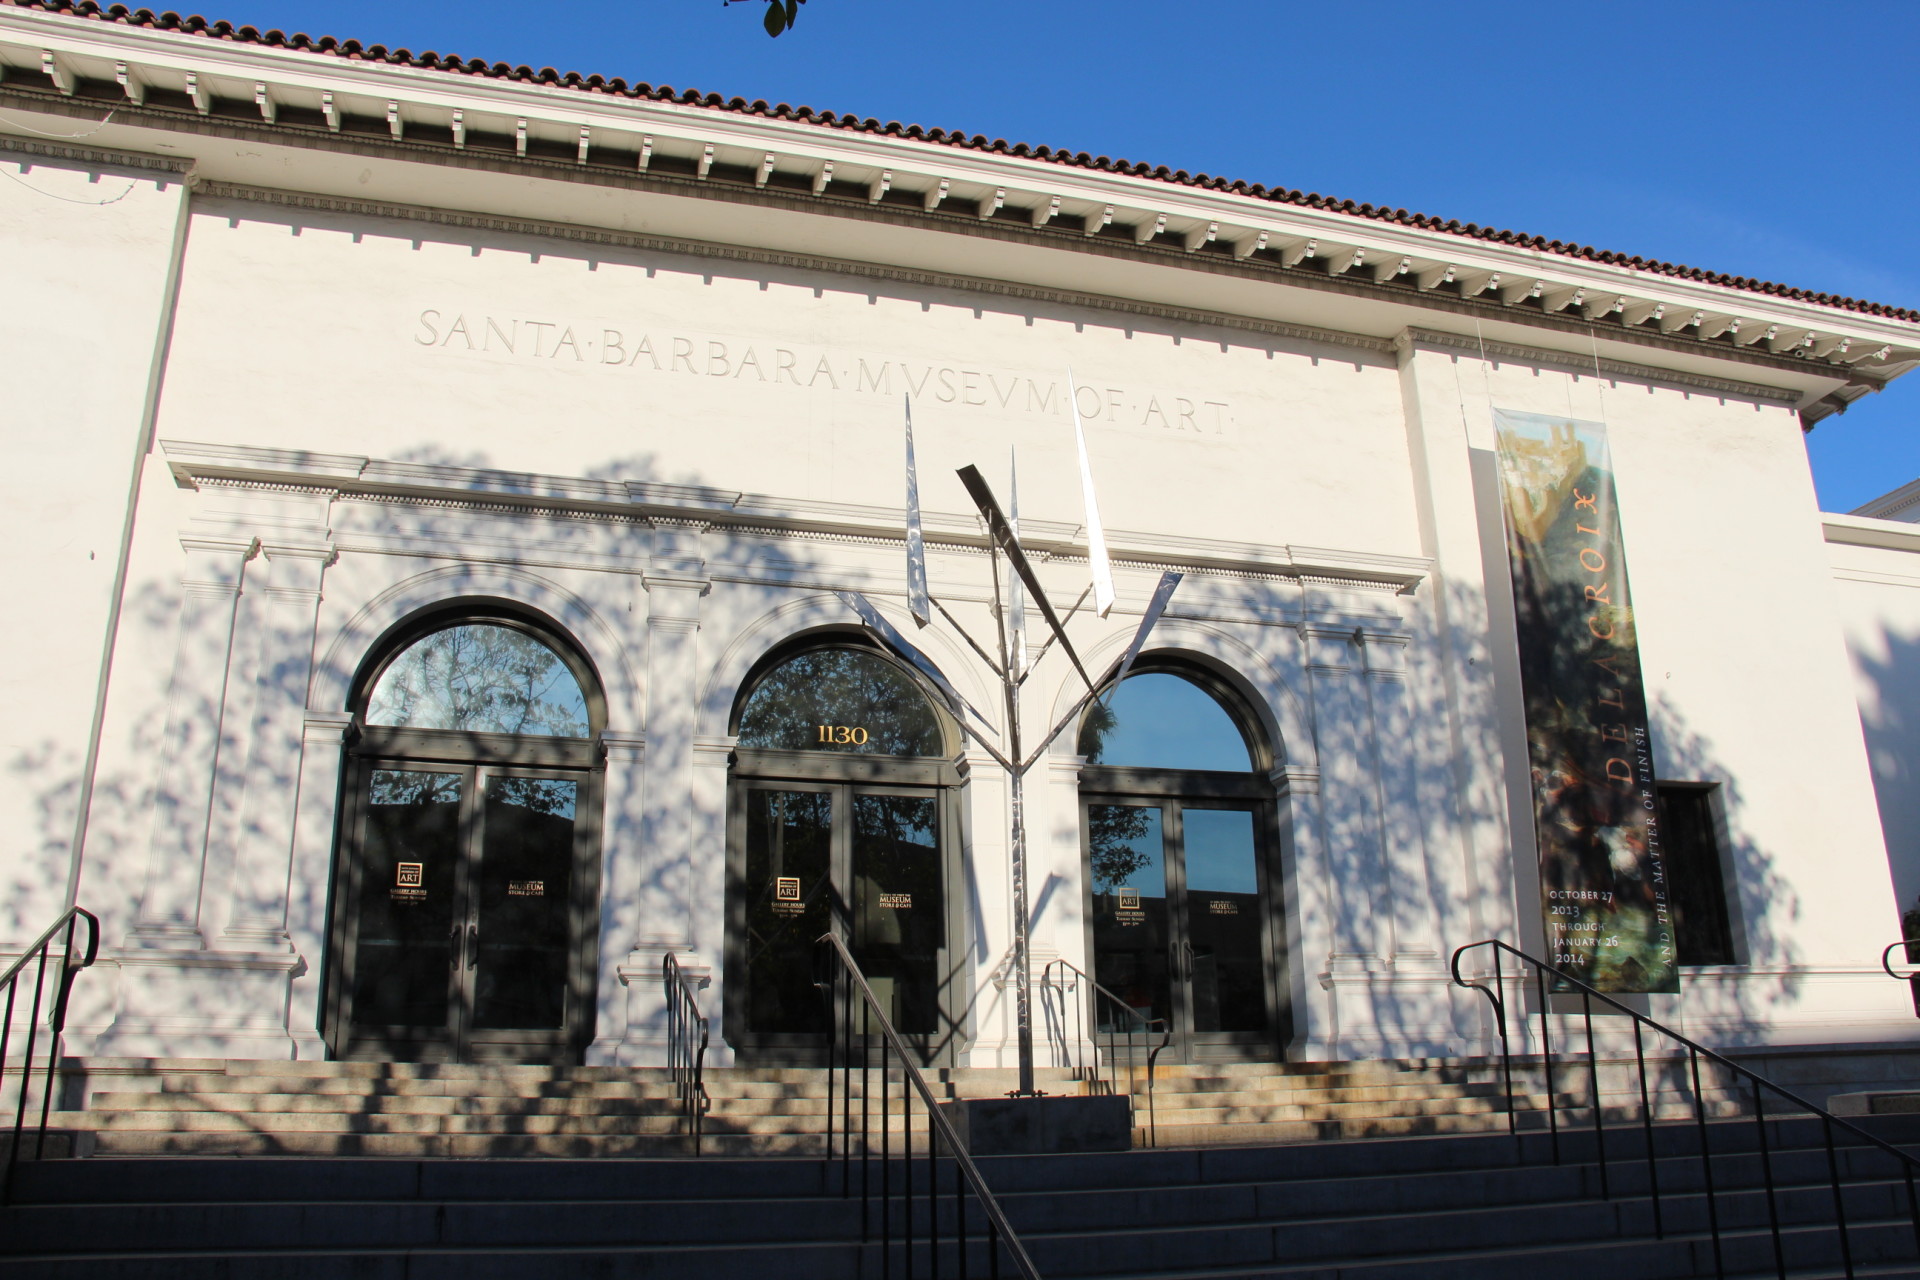 Highlights from the Santa Barbara Museum of Art Collection